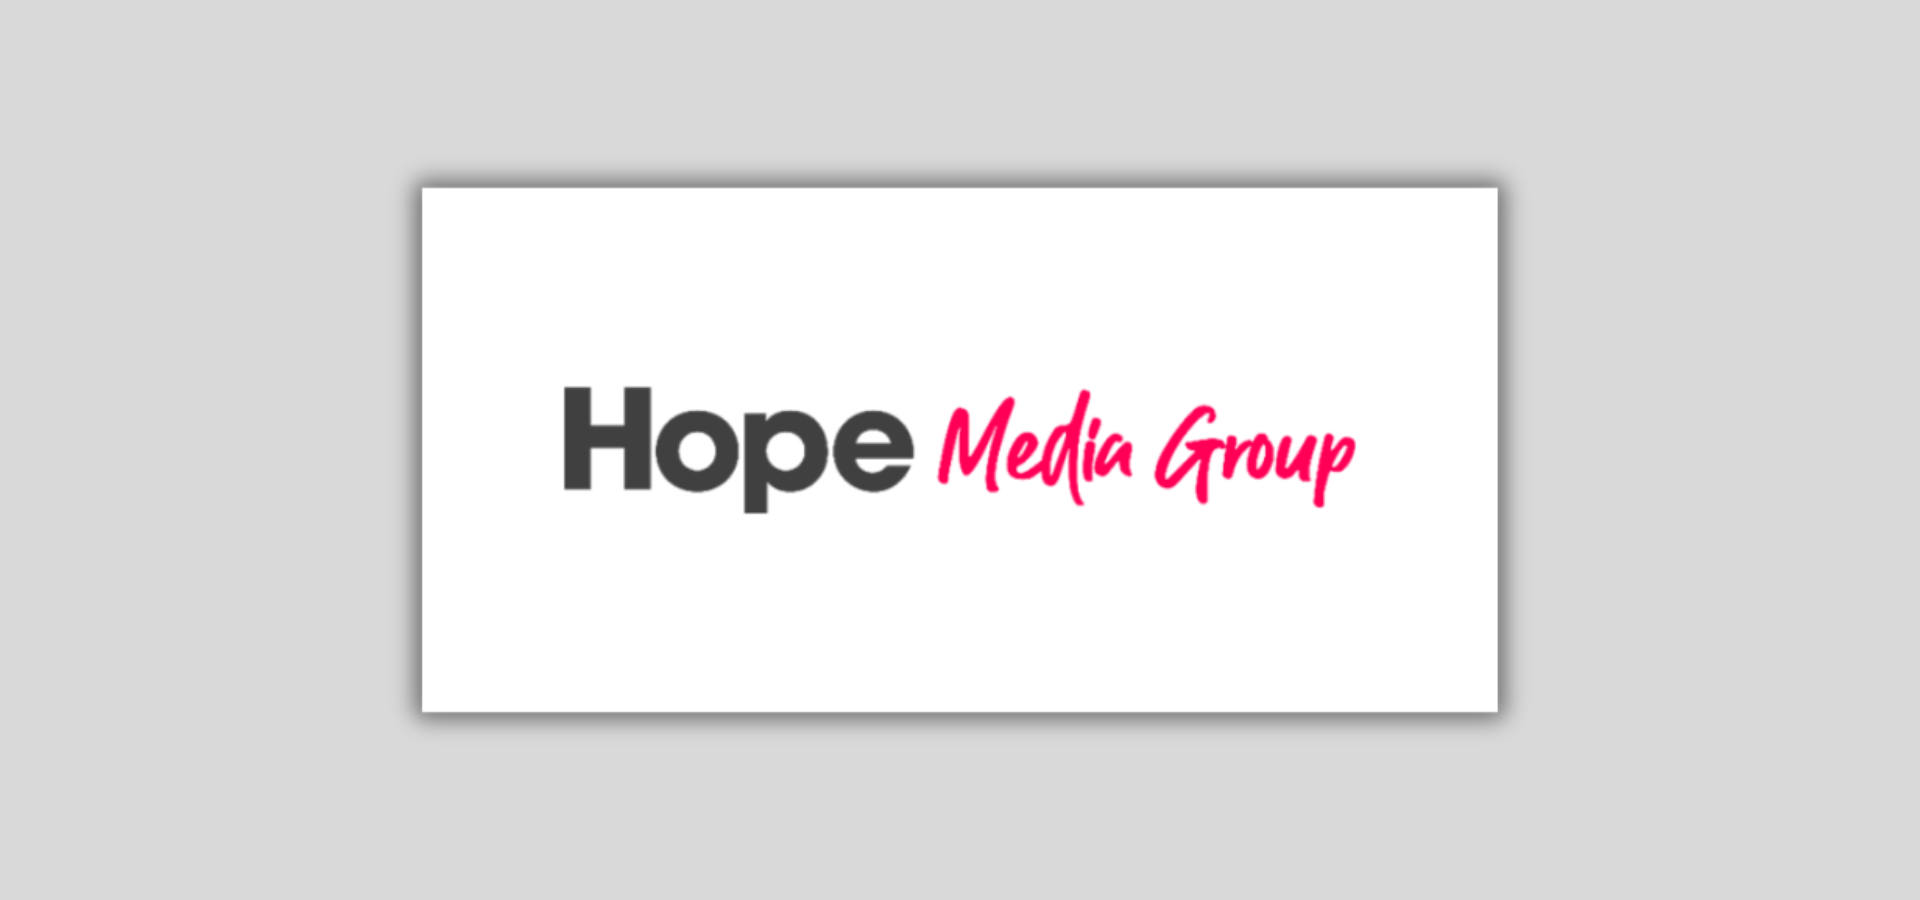 Hope Media Group Welcomes Coppelia as Director of Media Fundraising